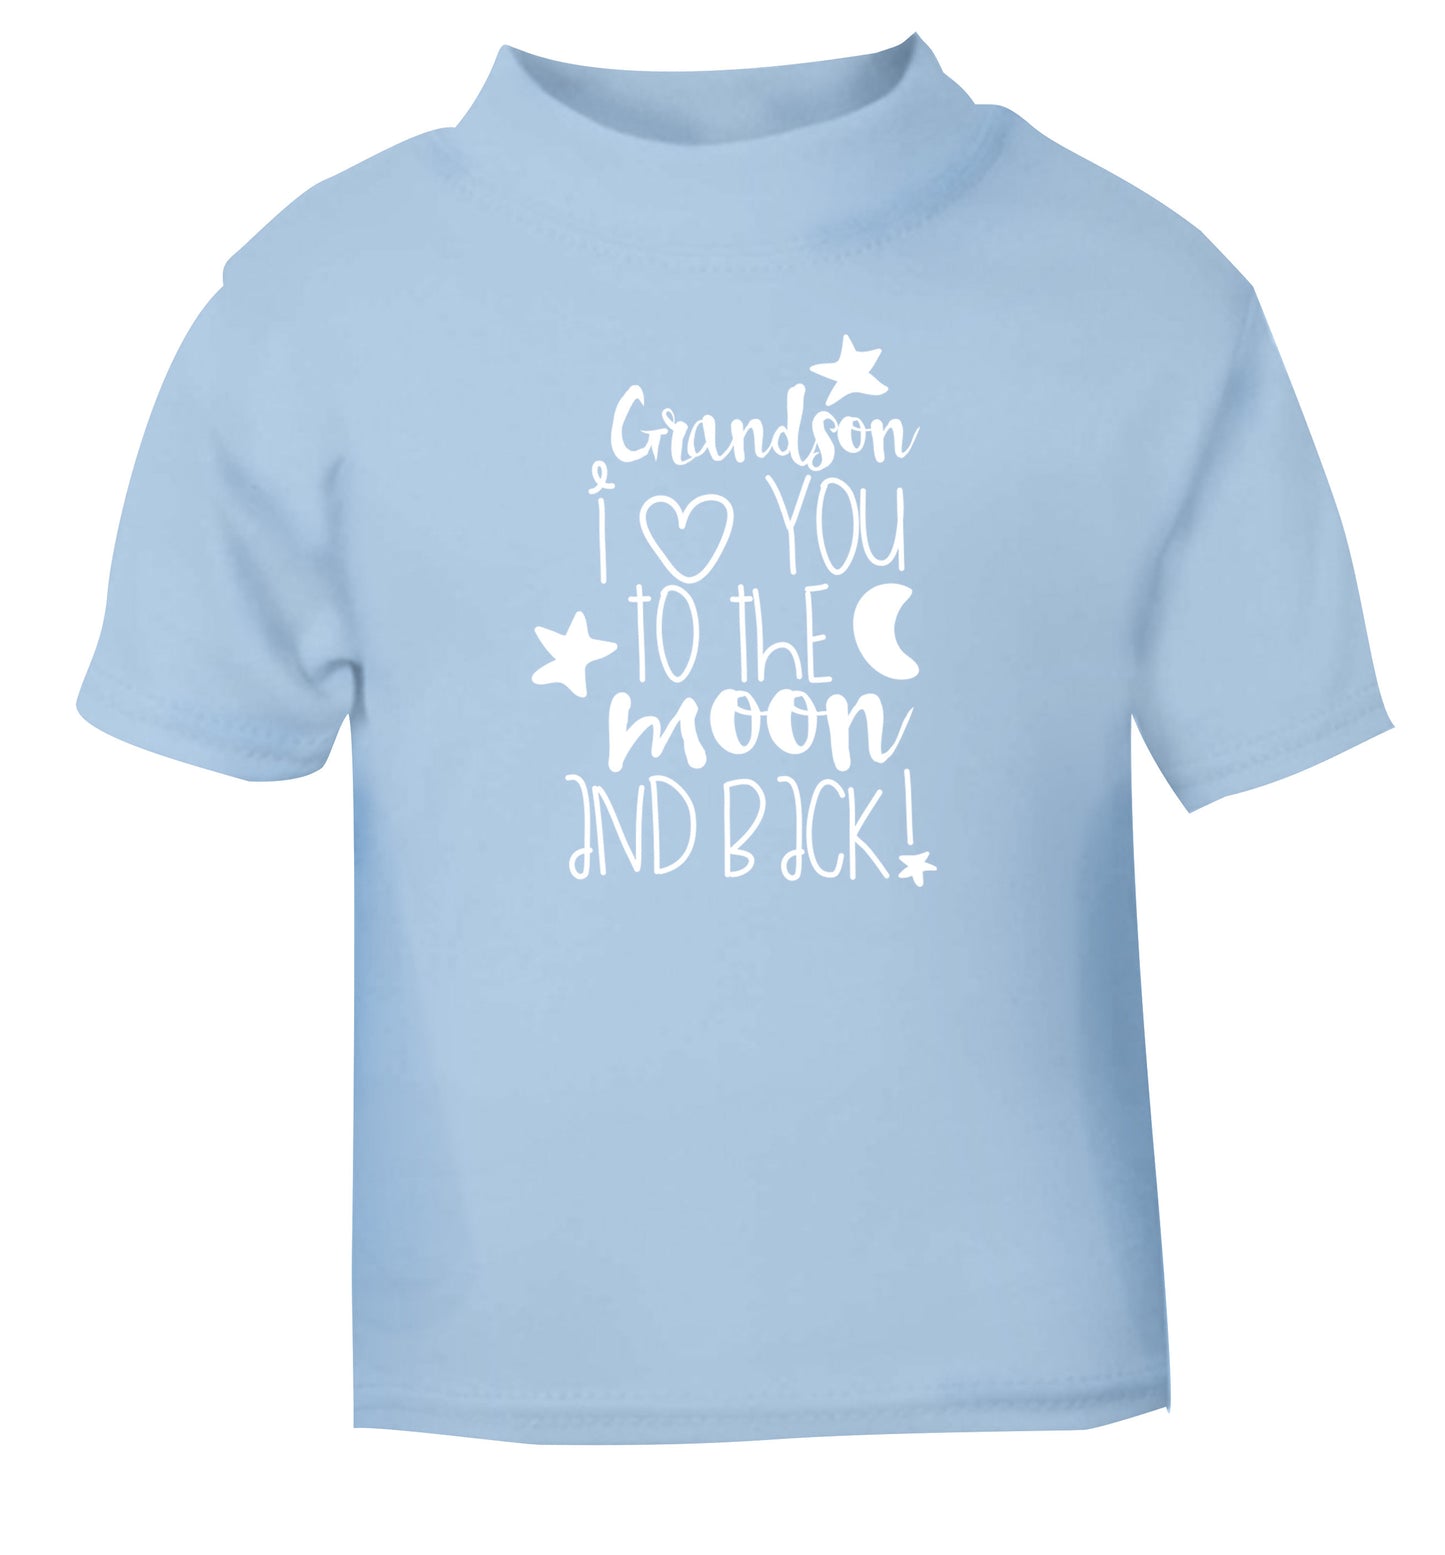 Grandson I love you to the moon and back light blue Baby Toddler Tshirt 2 Years